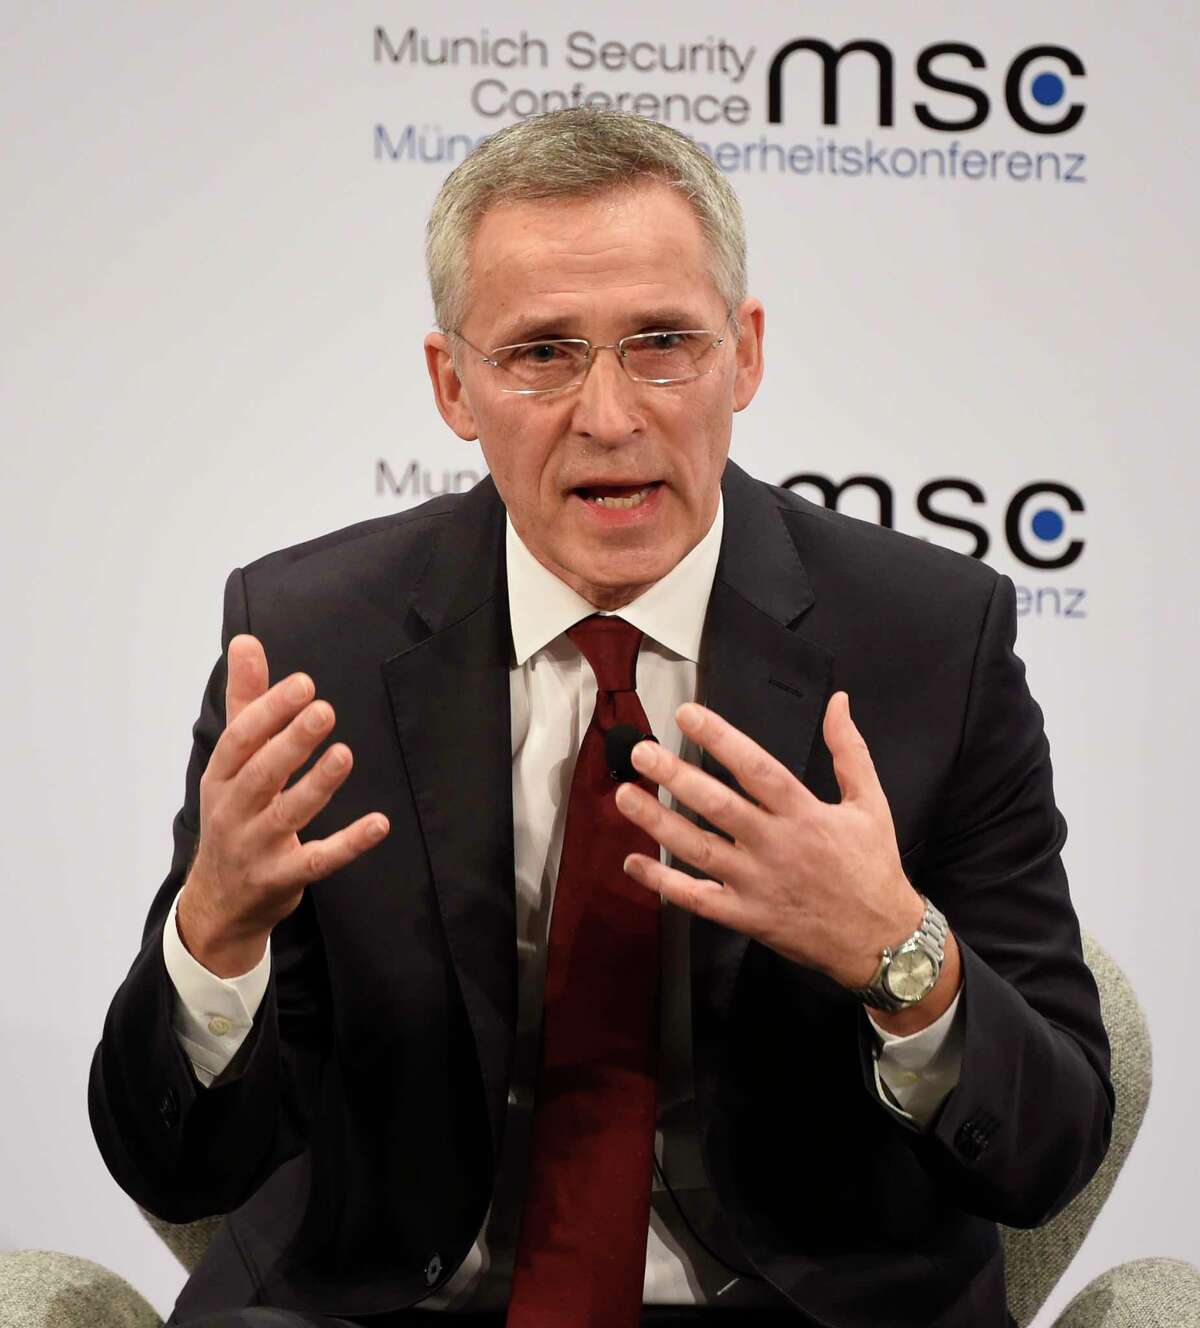 NATO Secretary General Jens Stoltenberg speaks on the second day of the Munich Security Conference in Munich, Germany, Saturday, Feb. 15, 2020. (AP Photo/Jens Meyer)